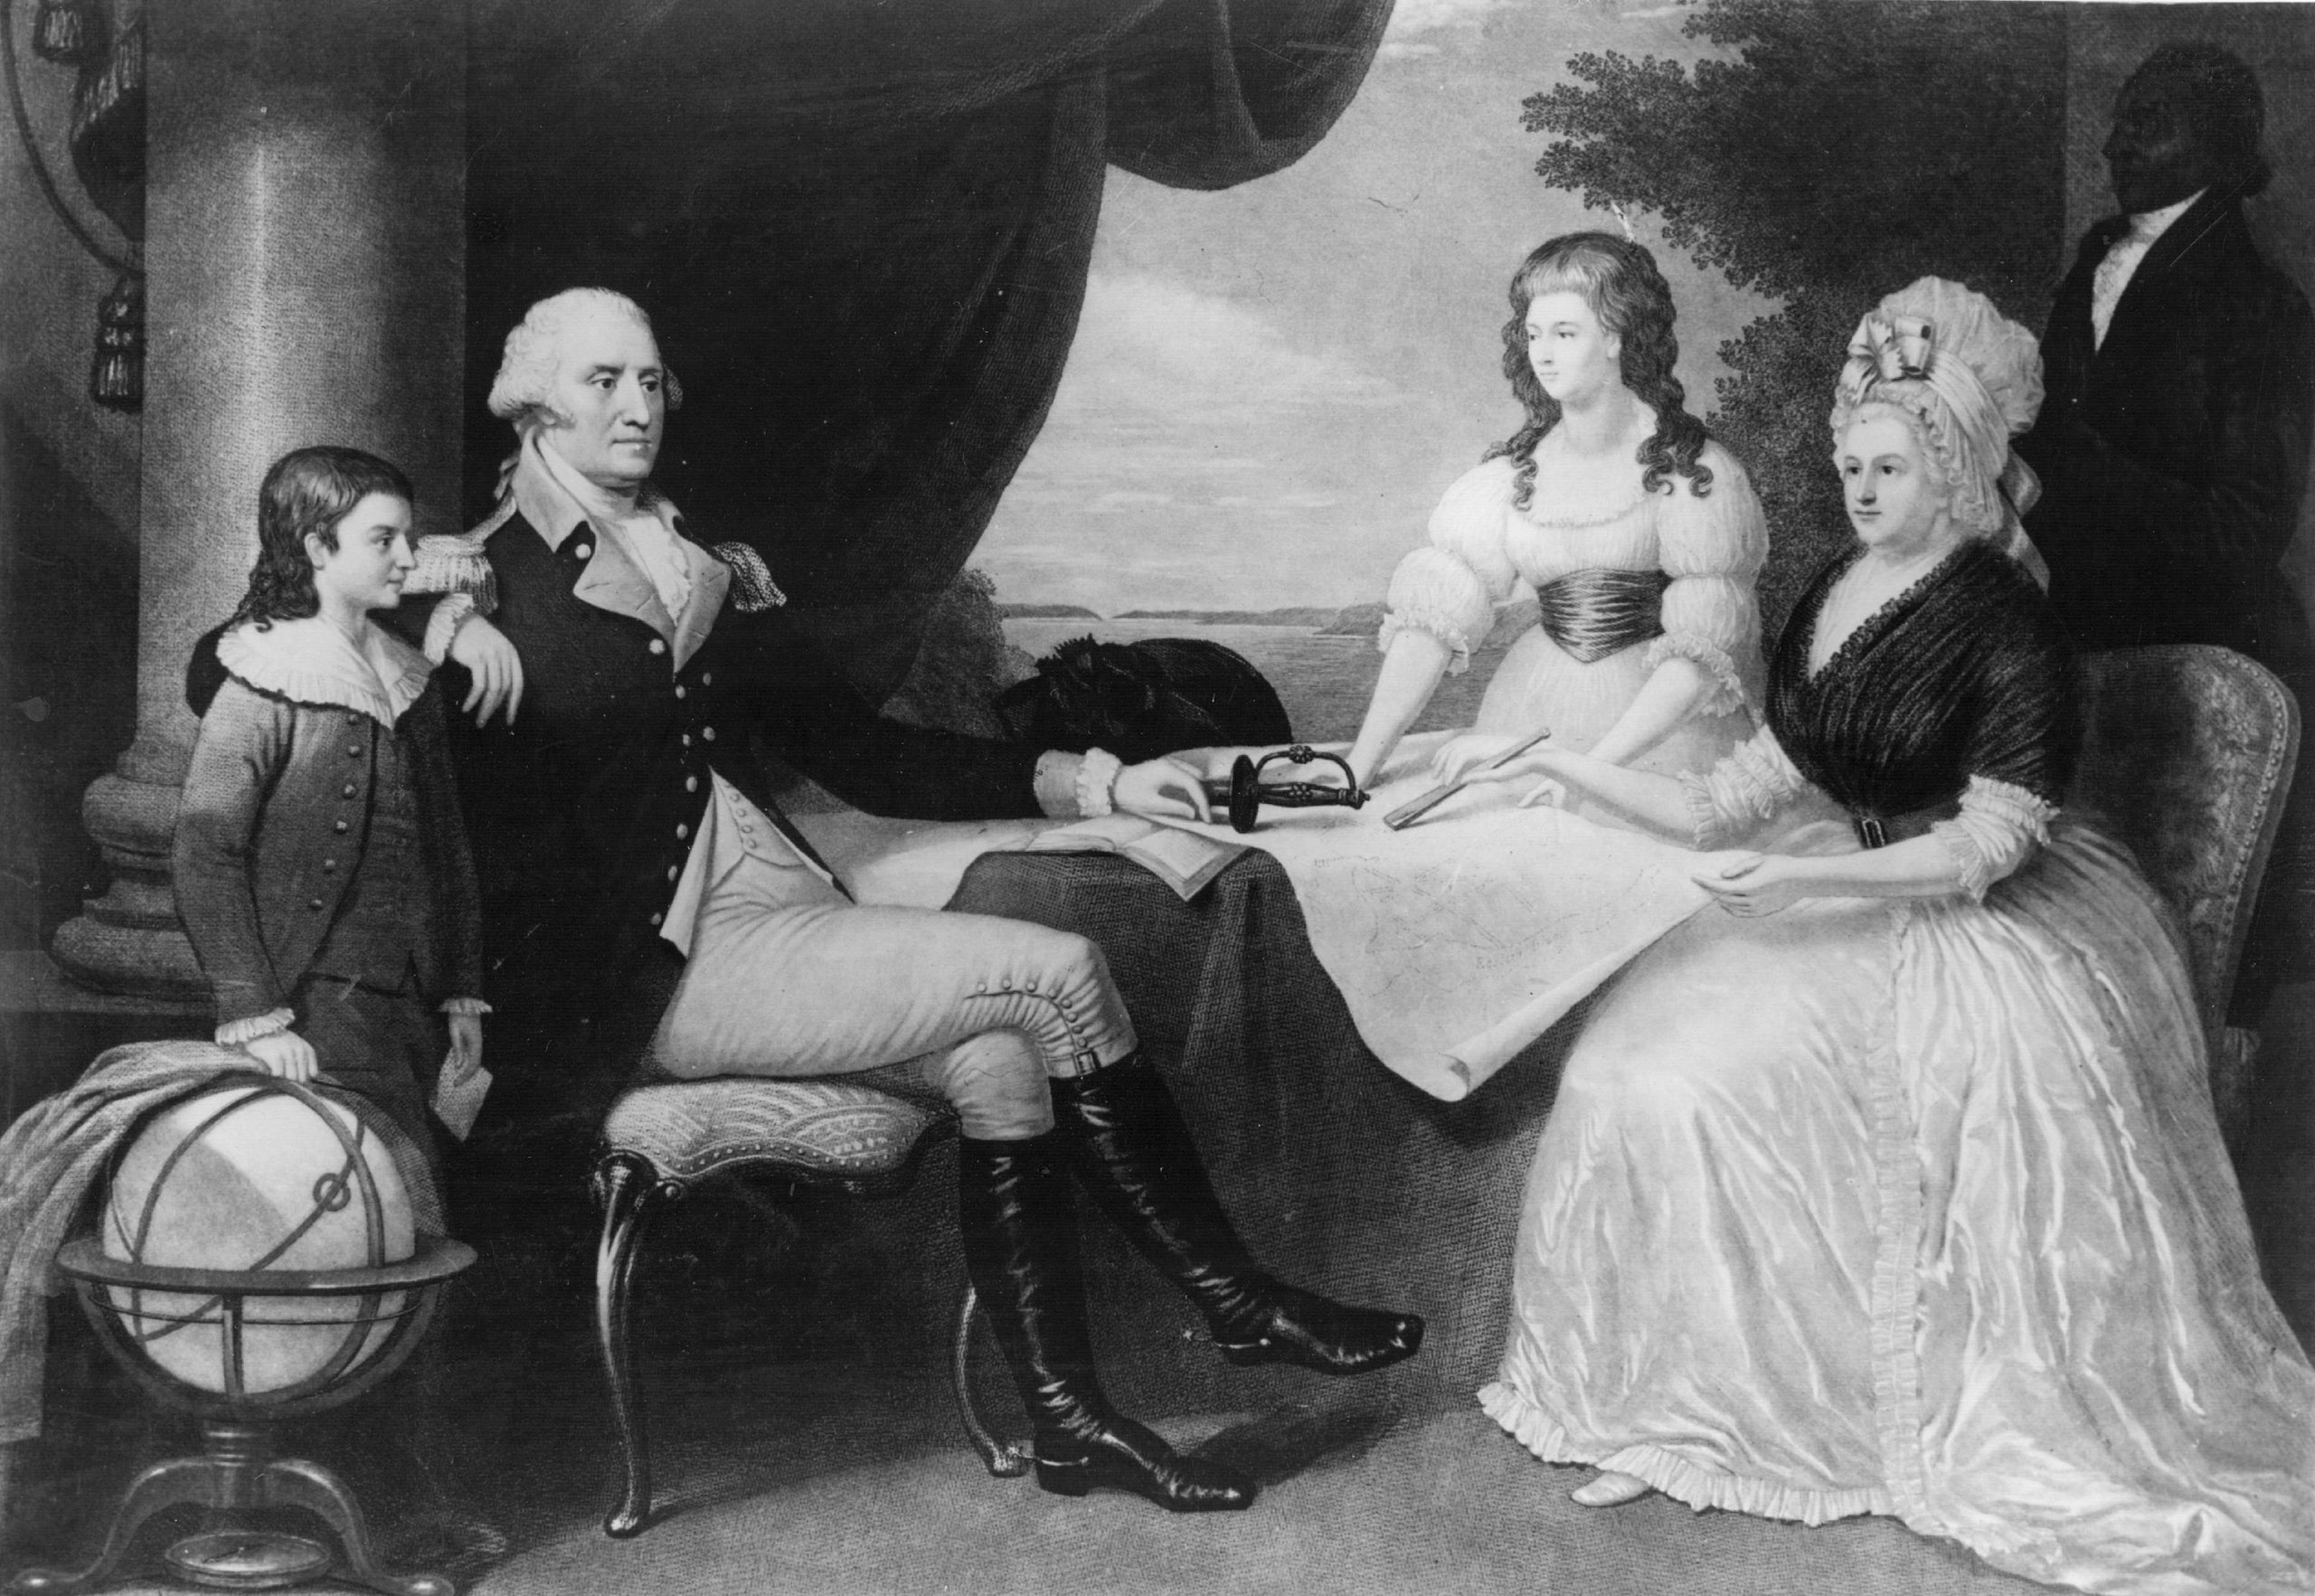 George Washington: America's first President had no biological children, but he became stepfather to the two children of the widow Martha Custis when he married her in 1759: John  Jacky  Parke Custis, left in the c. 1761 illustration above, and Martha  Patsy  Parke Custis. Both of the Custis children met with untimely ends; Jacky joined his stepfather's army but died from dysentery soon thereafter, while Martha suffered from epilepsy and died at 17.